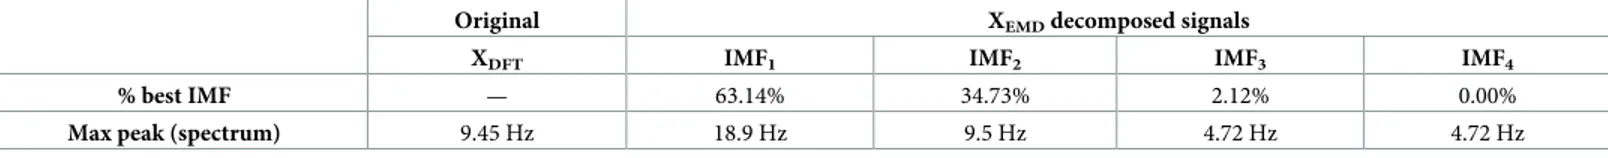 Table 2 shows the proportion of time each IMF was selected (%, in controls) as the best IMF along with the spectral averaged maximum peak frequency